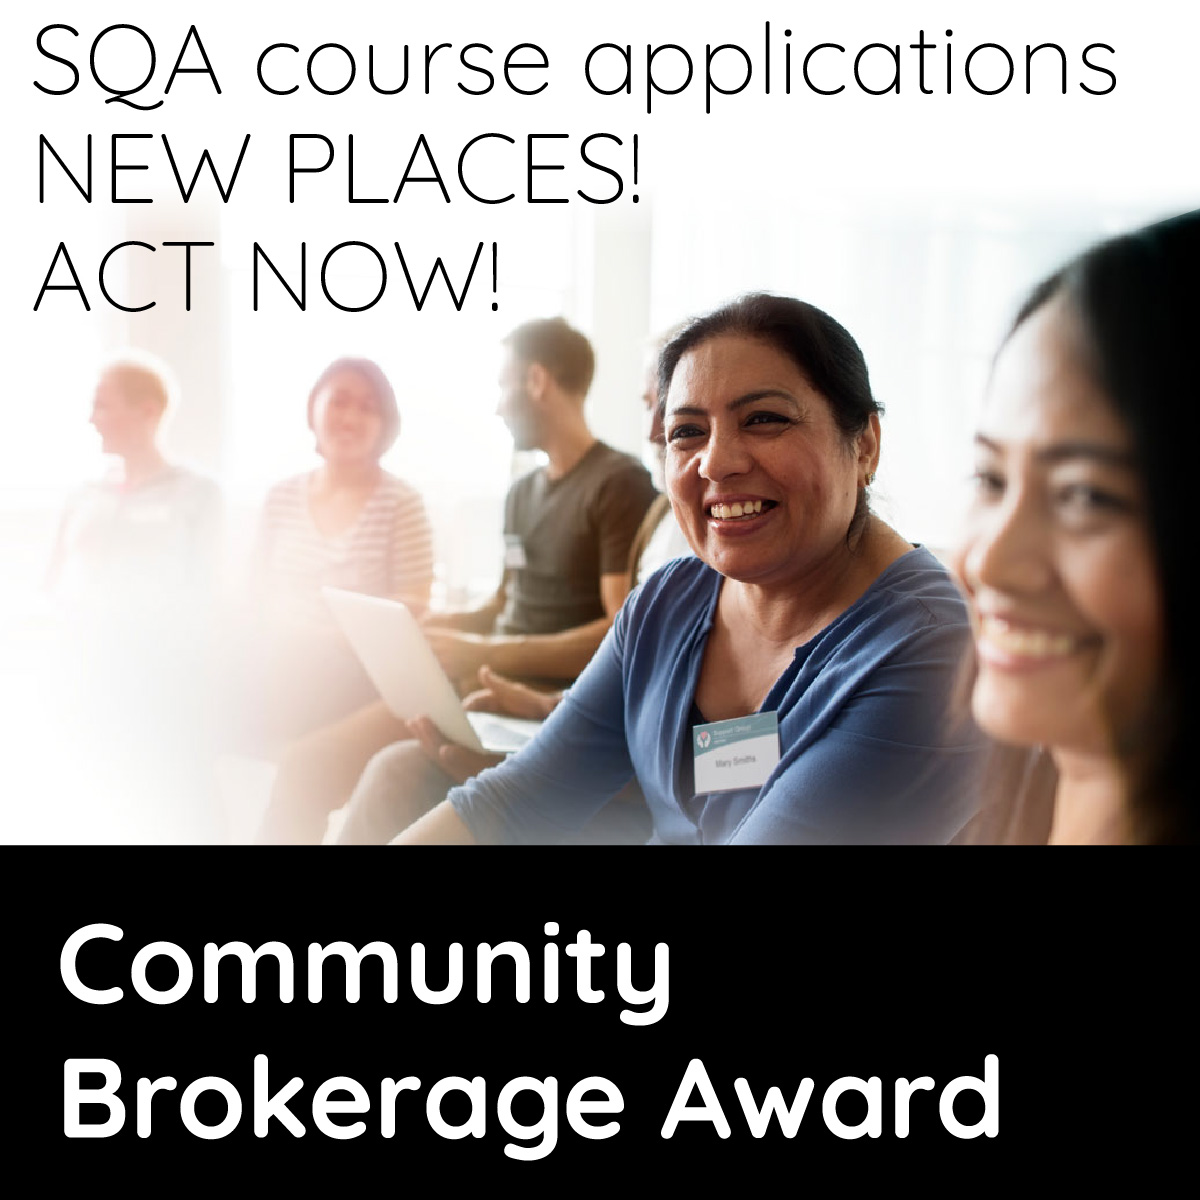 Find the new Community Brokerage Scotland page and course webinar